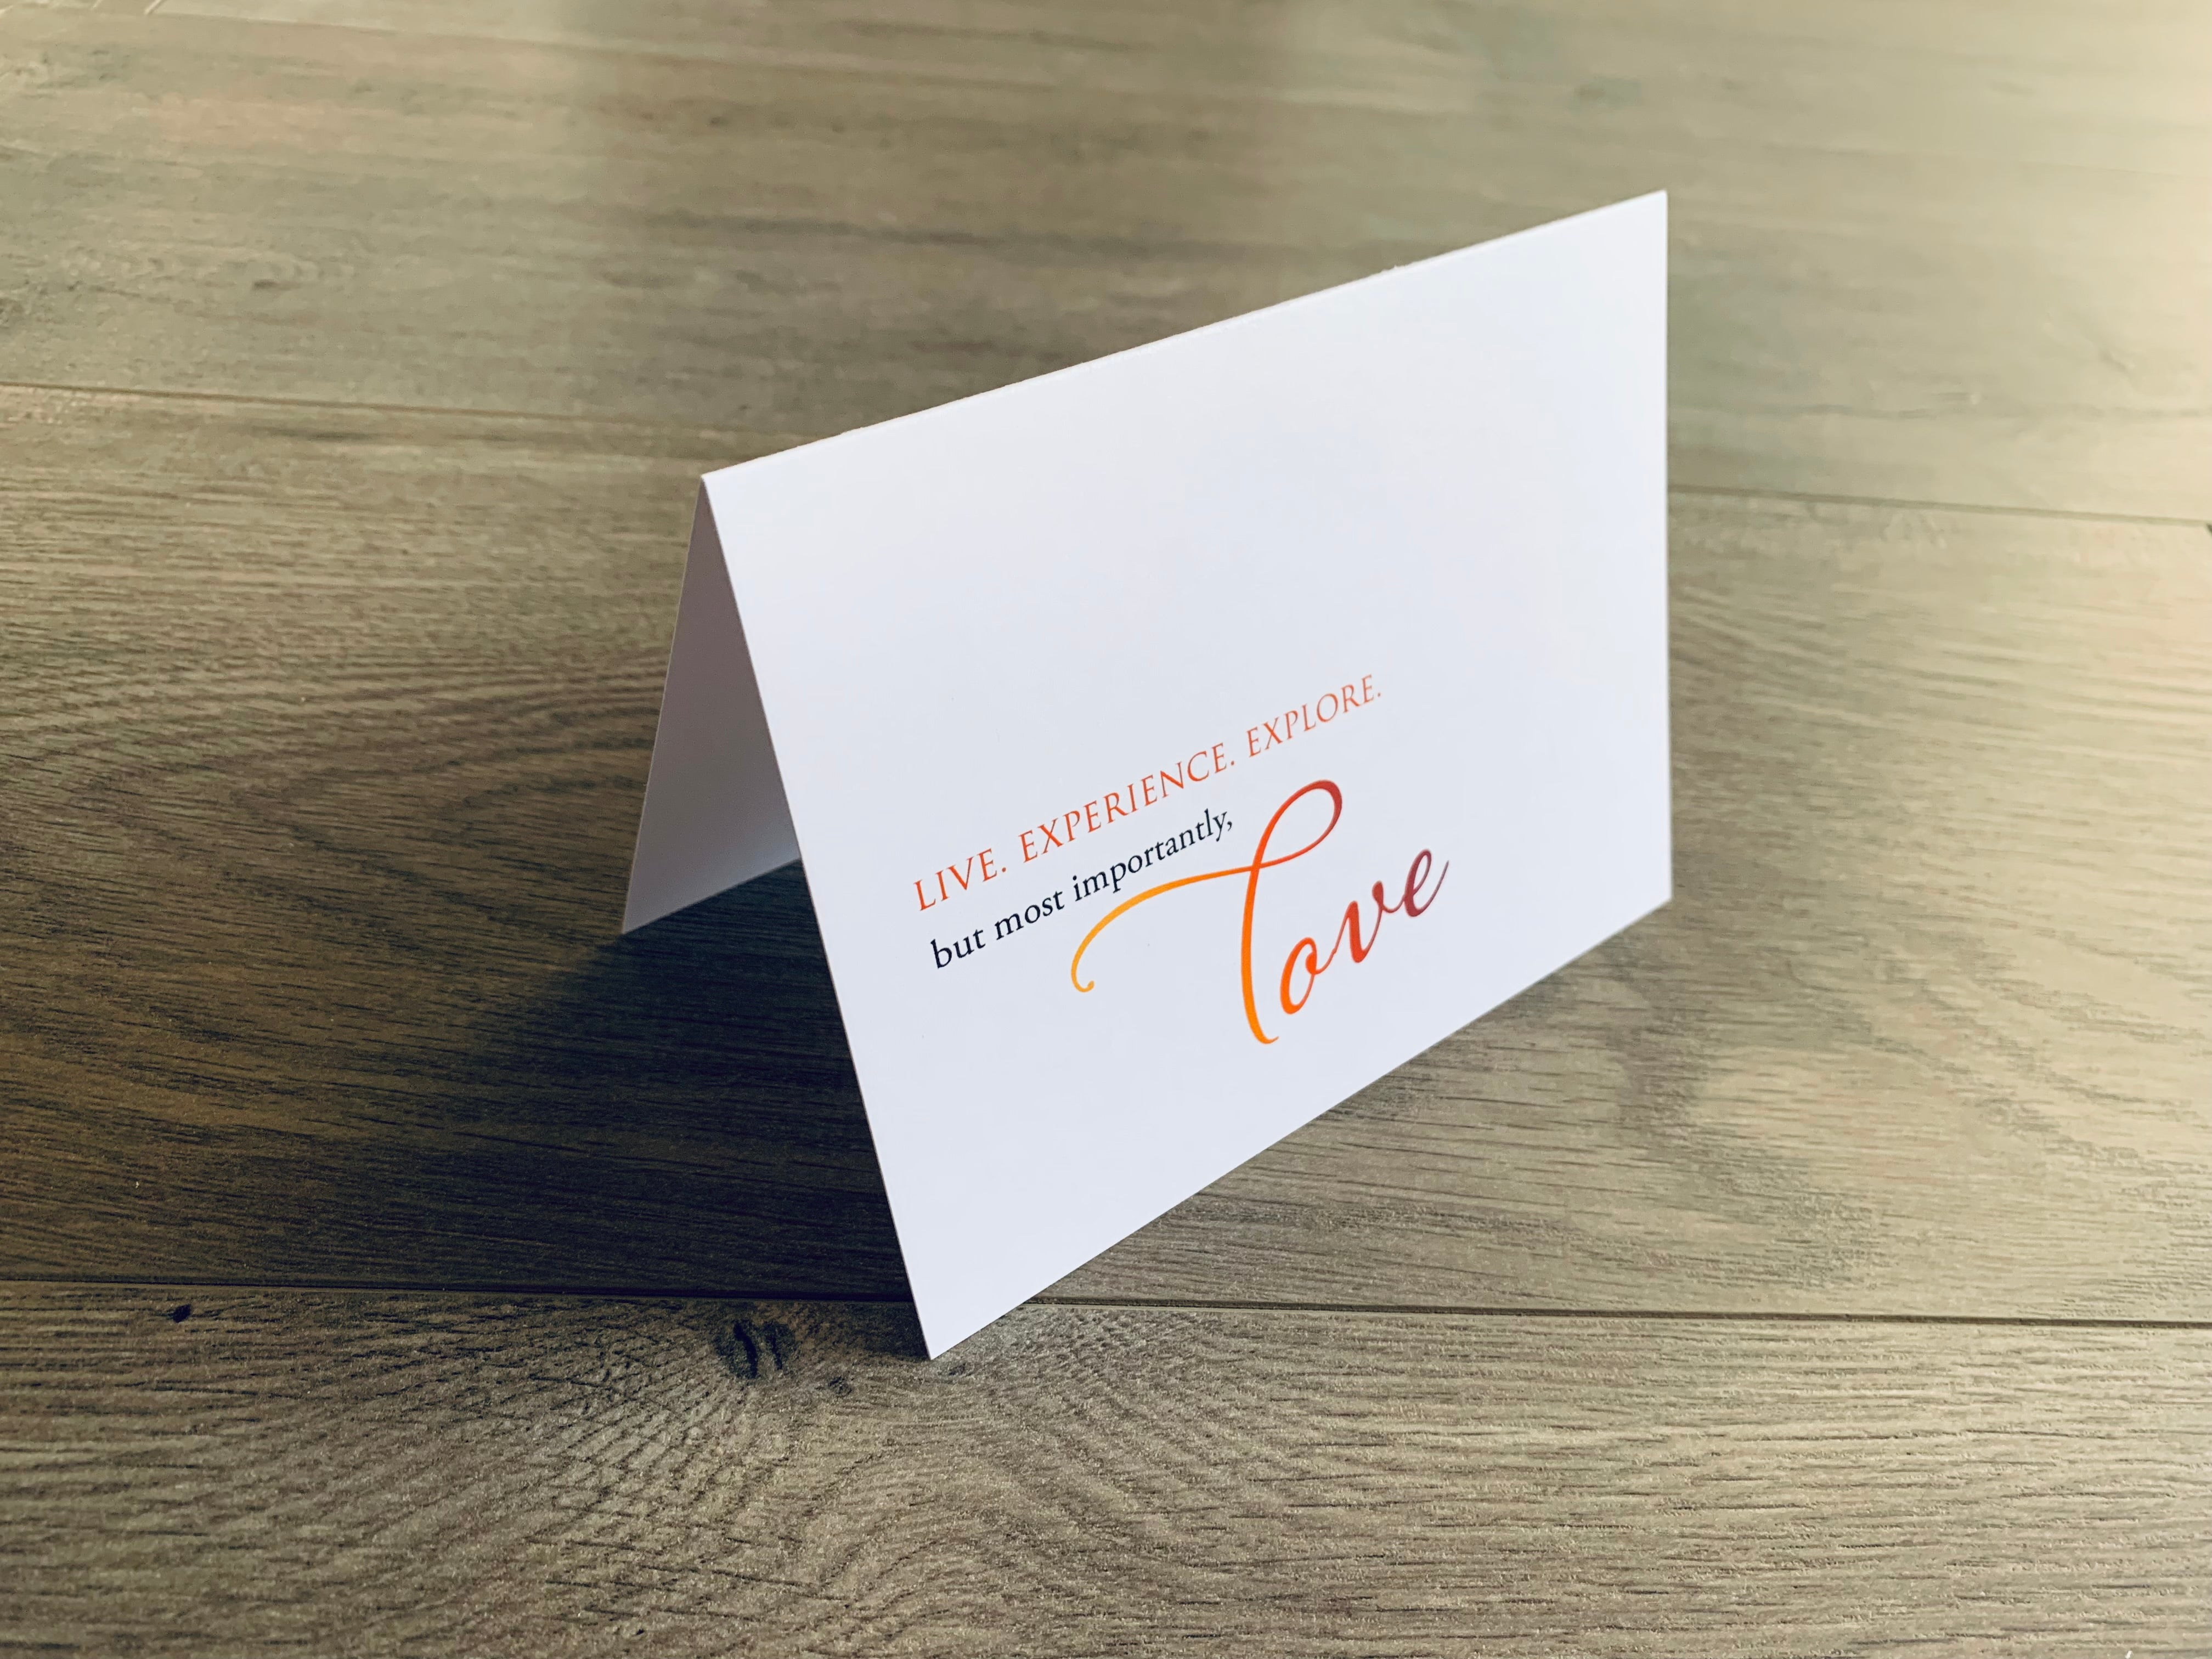 A folded white notecard is propped up on a wooden floor. The card reads, "live. experience. explore. but most importantly, love" in a mix of serif and script fonts. Love Collection by Stationare.